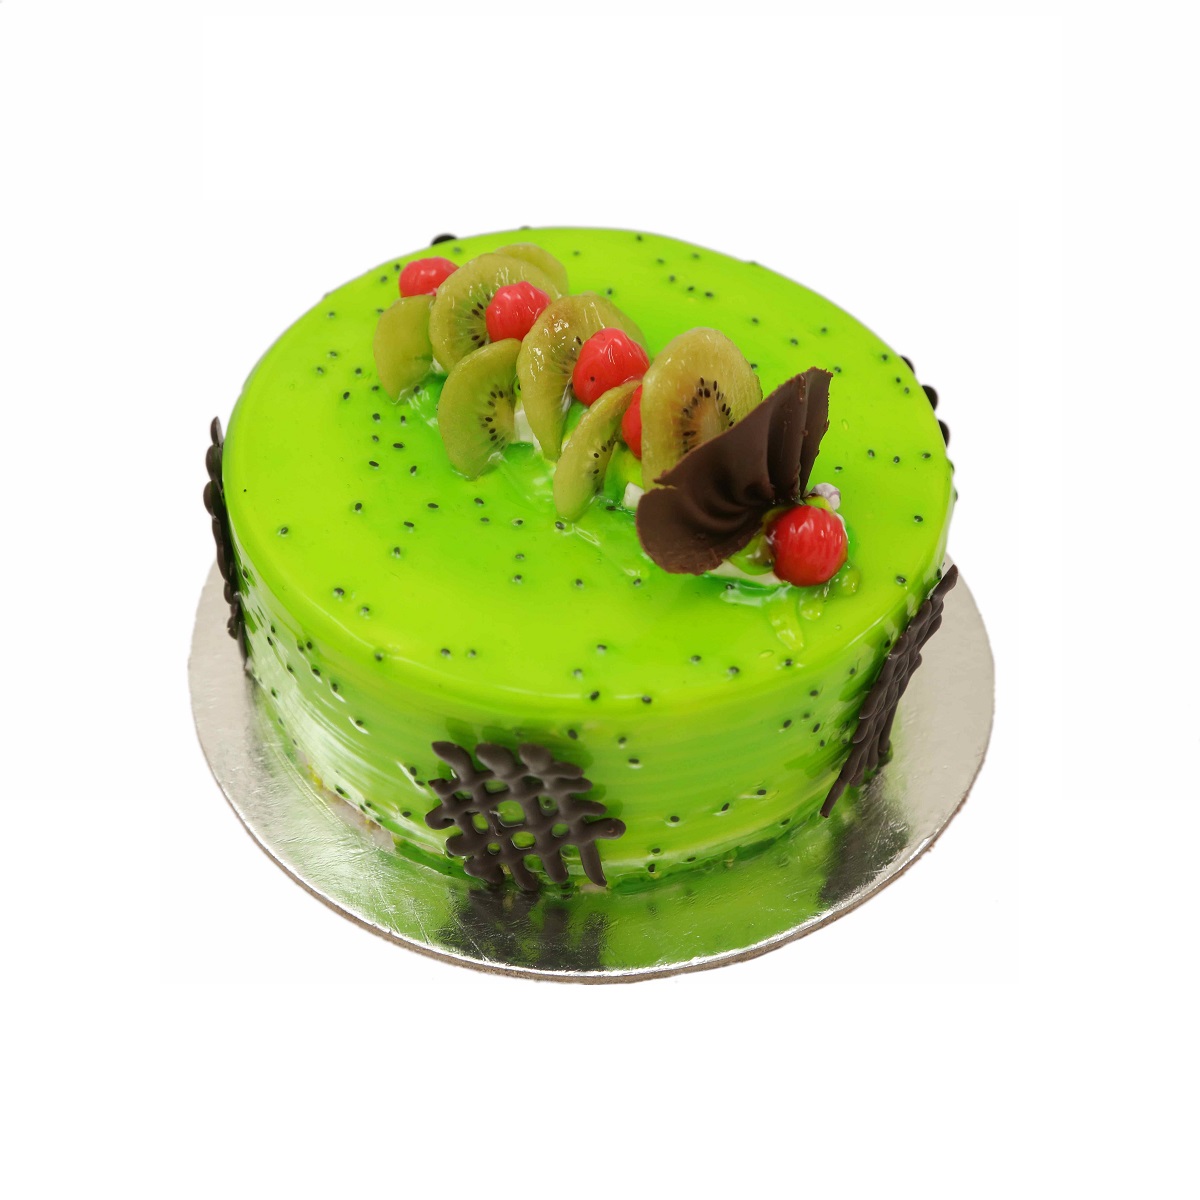 Send Delicious Kiwi Cake Gifts To hyderabad